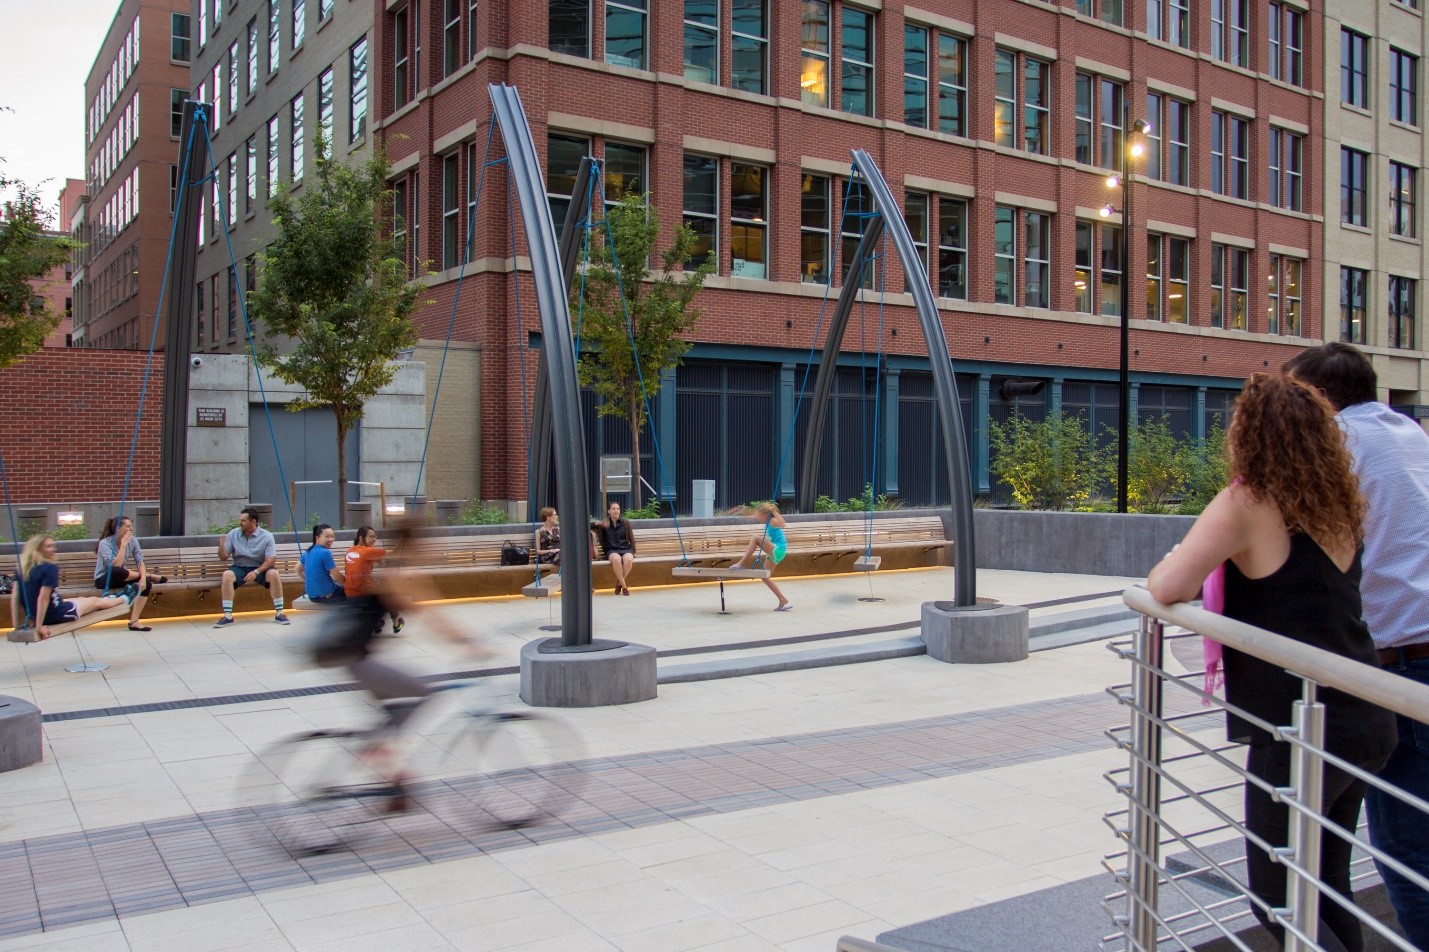 Triangle Plaza in Denver serves as an urban stage for people-watching and interaction, located on an abandoned street right-of-way linking Union Station and the Pepsi Center. Anchoring the plaza’s southern edge is the ‘swing forest,’ which consists of custom-designed swings affixed to curved railroad rails. Image Copyright: Brandon Huttenlocher photographer / Design Workshop, Inc.